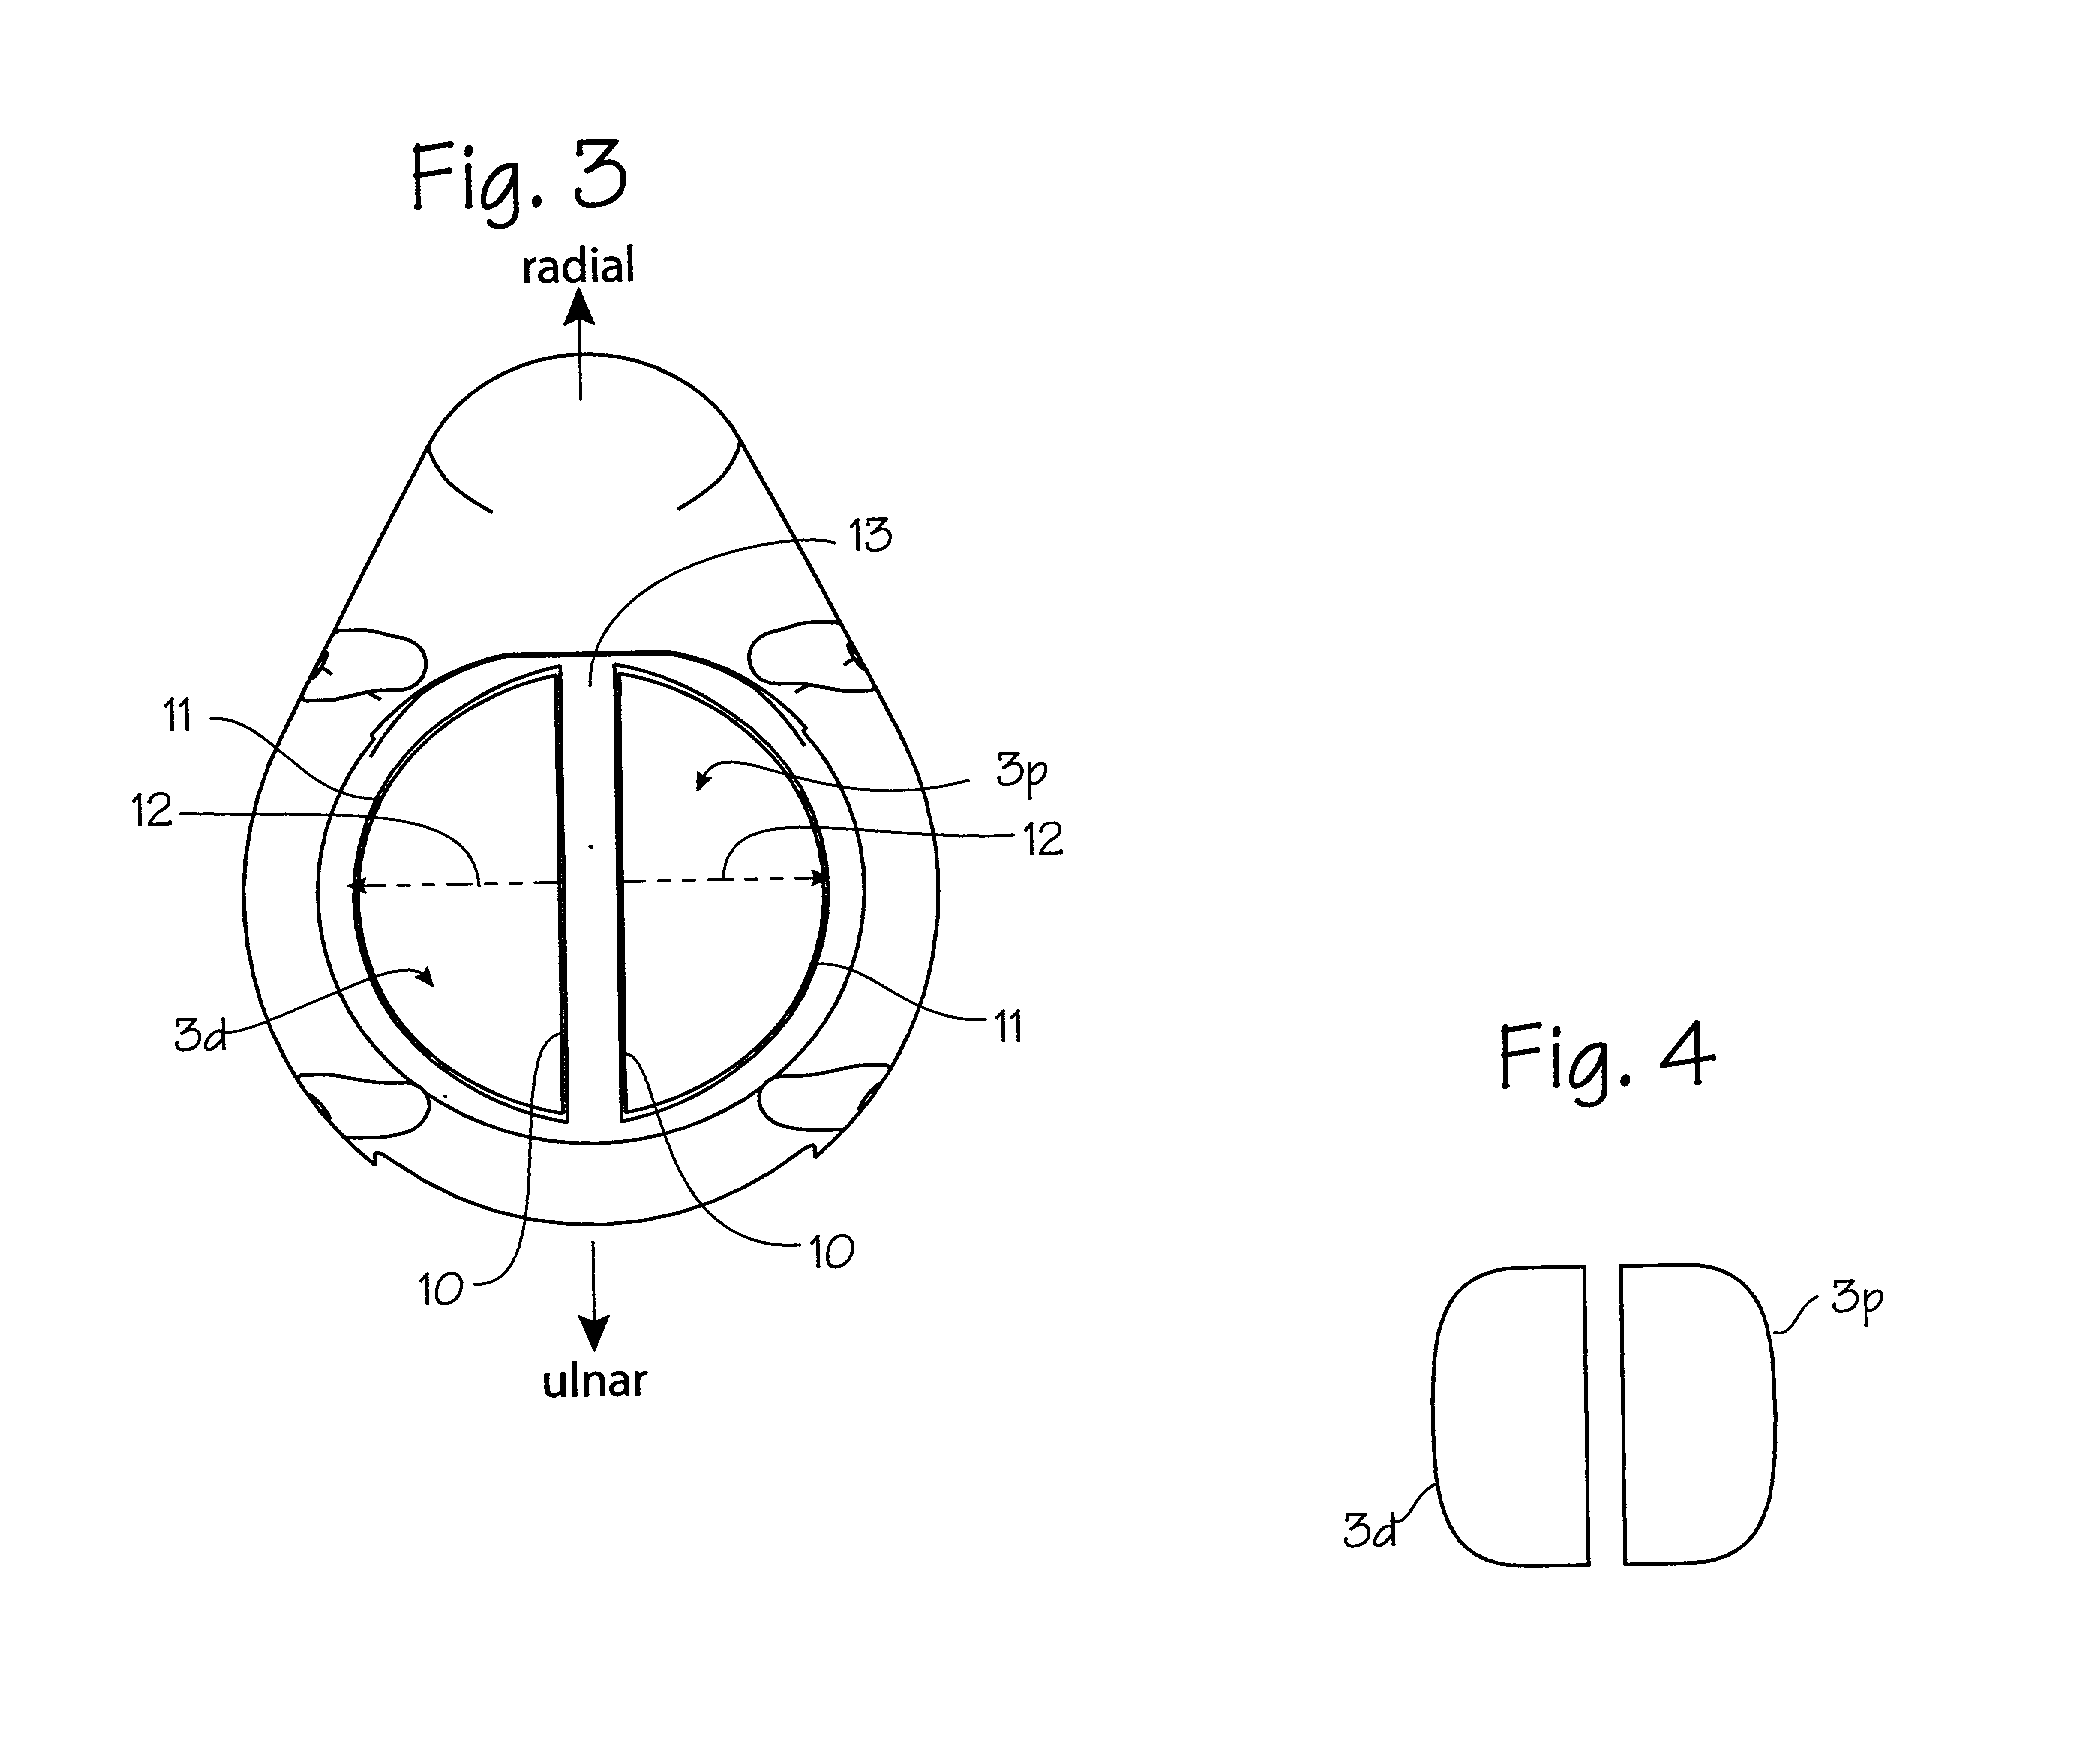 Electro-acupuncture device with D-shaped stimulation electrodes